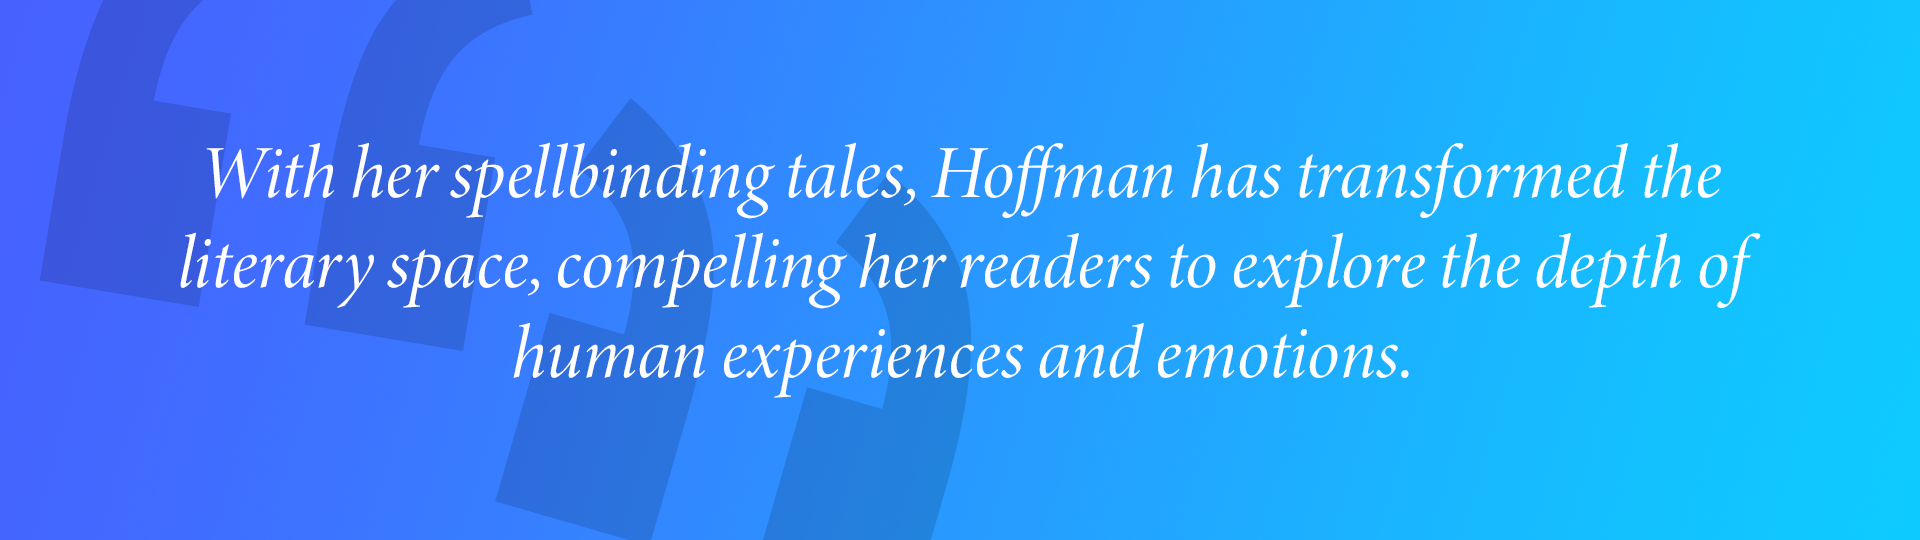 With her spellbinding tales, Hoffman has transformed the
literary space, compelling her readers to explore the depth of human experiences and emotions.